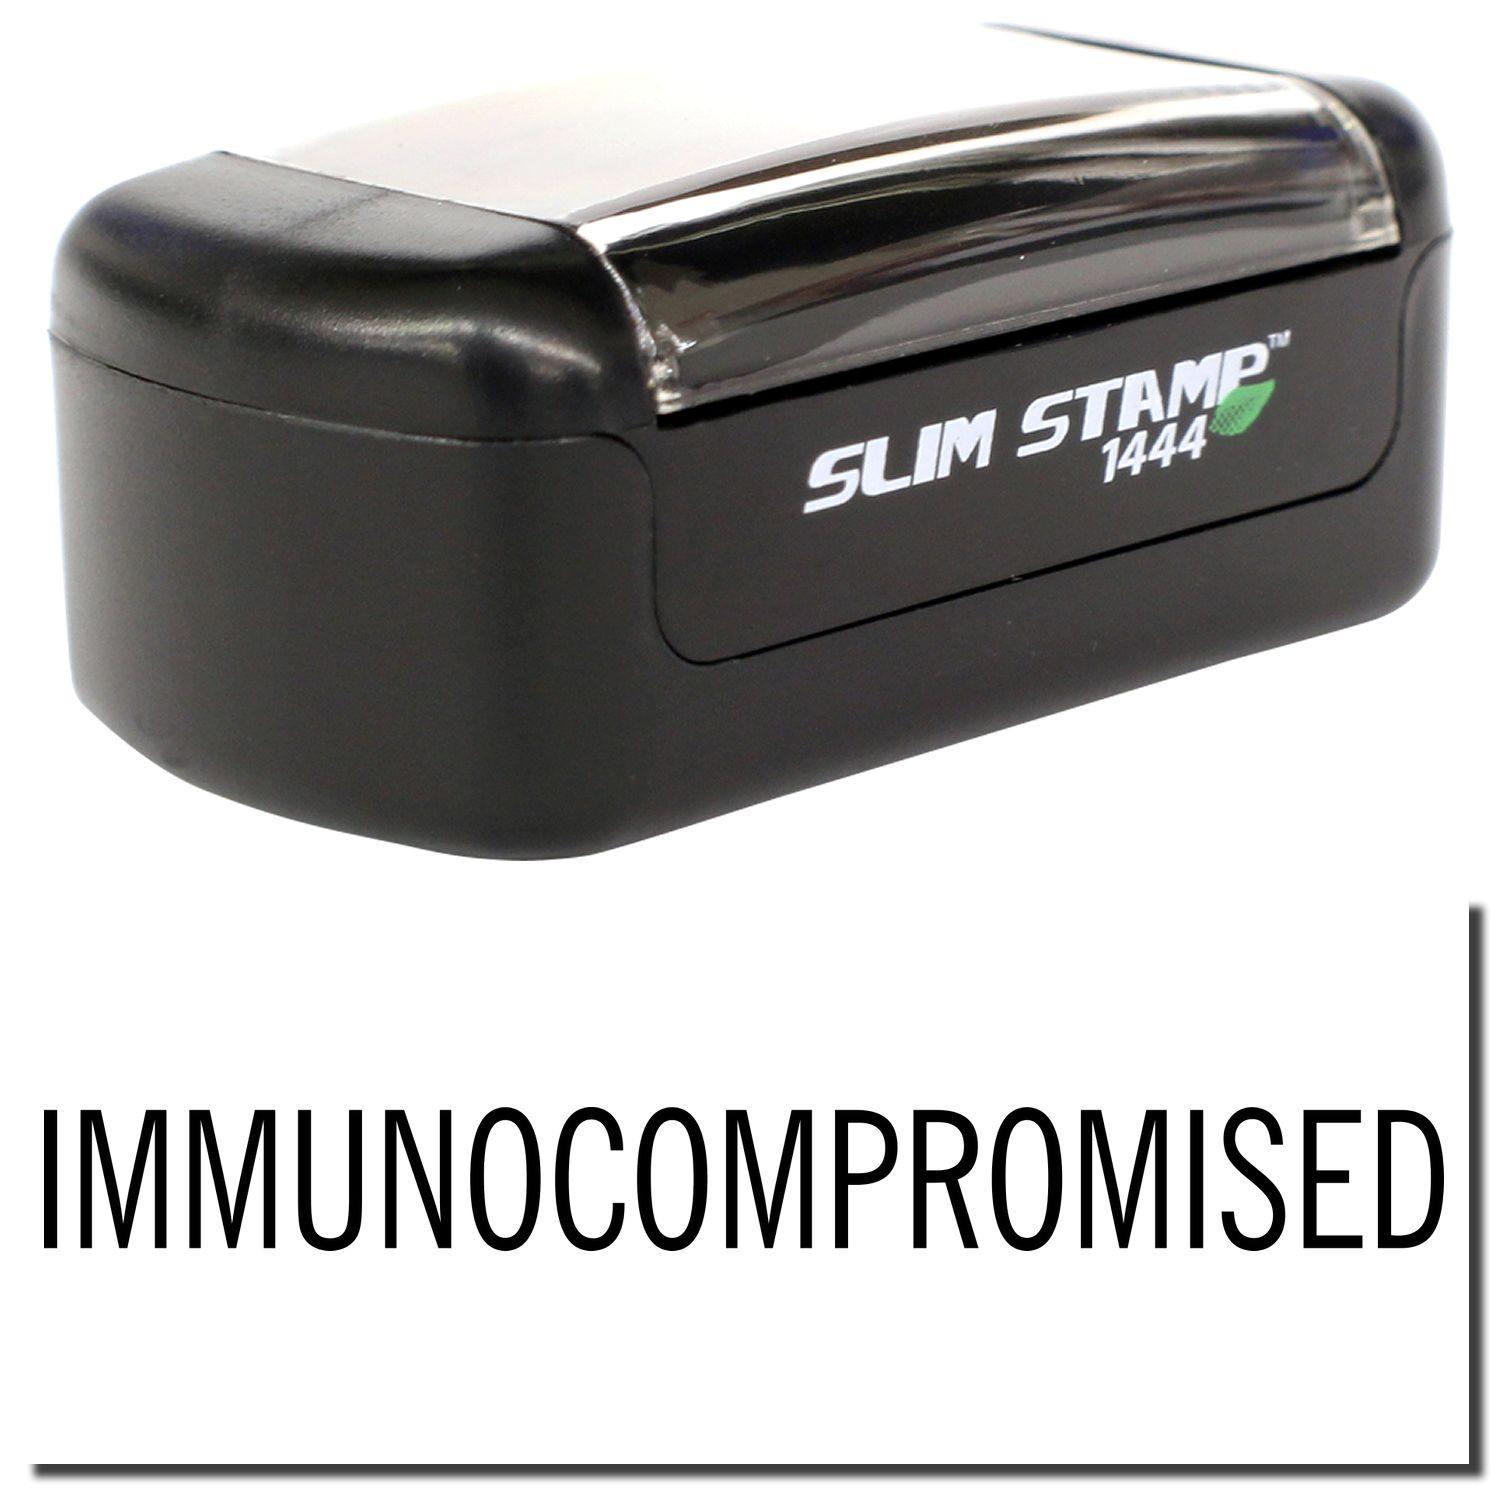 A stock office pre-inked stamp with a stamped image showing how the text "IMMUNOCOMPROMISED" is displayed after stamping.